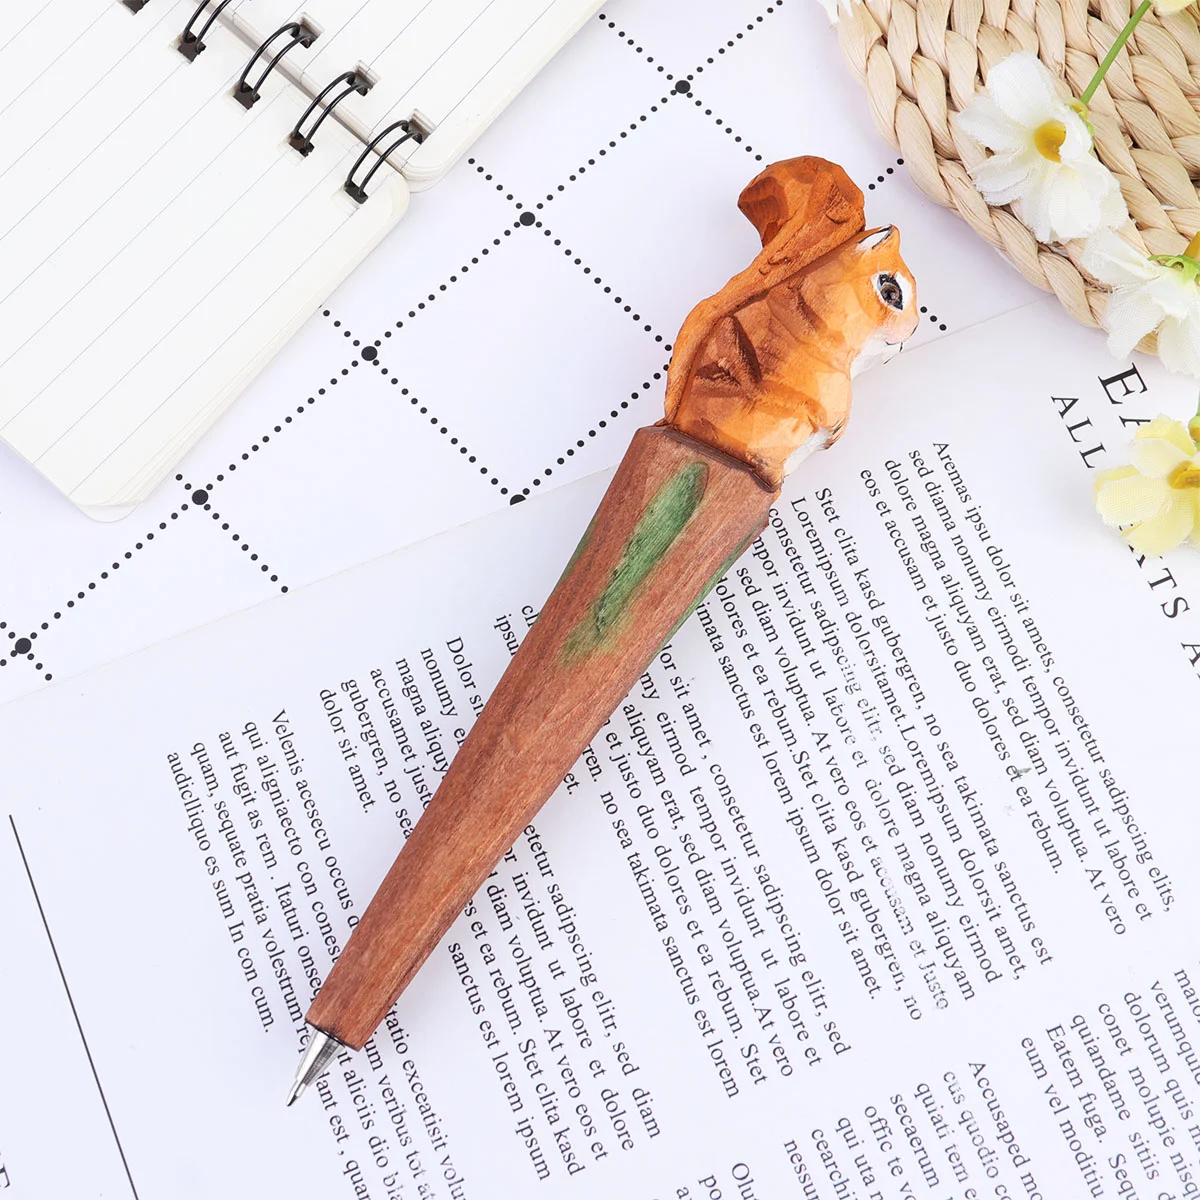 Pure Handmade Wood Carving Animal Pen Creative Wood Carving Squirrel Ballpoint Pen Replaceable Refill Gel Pen for Students